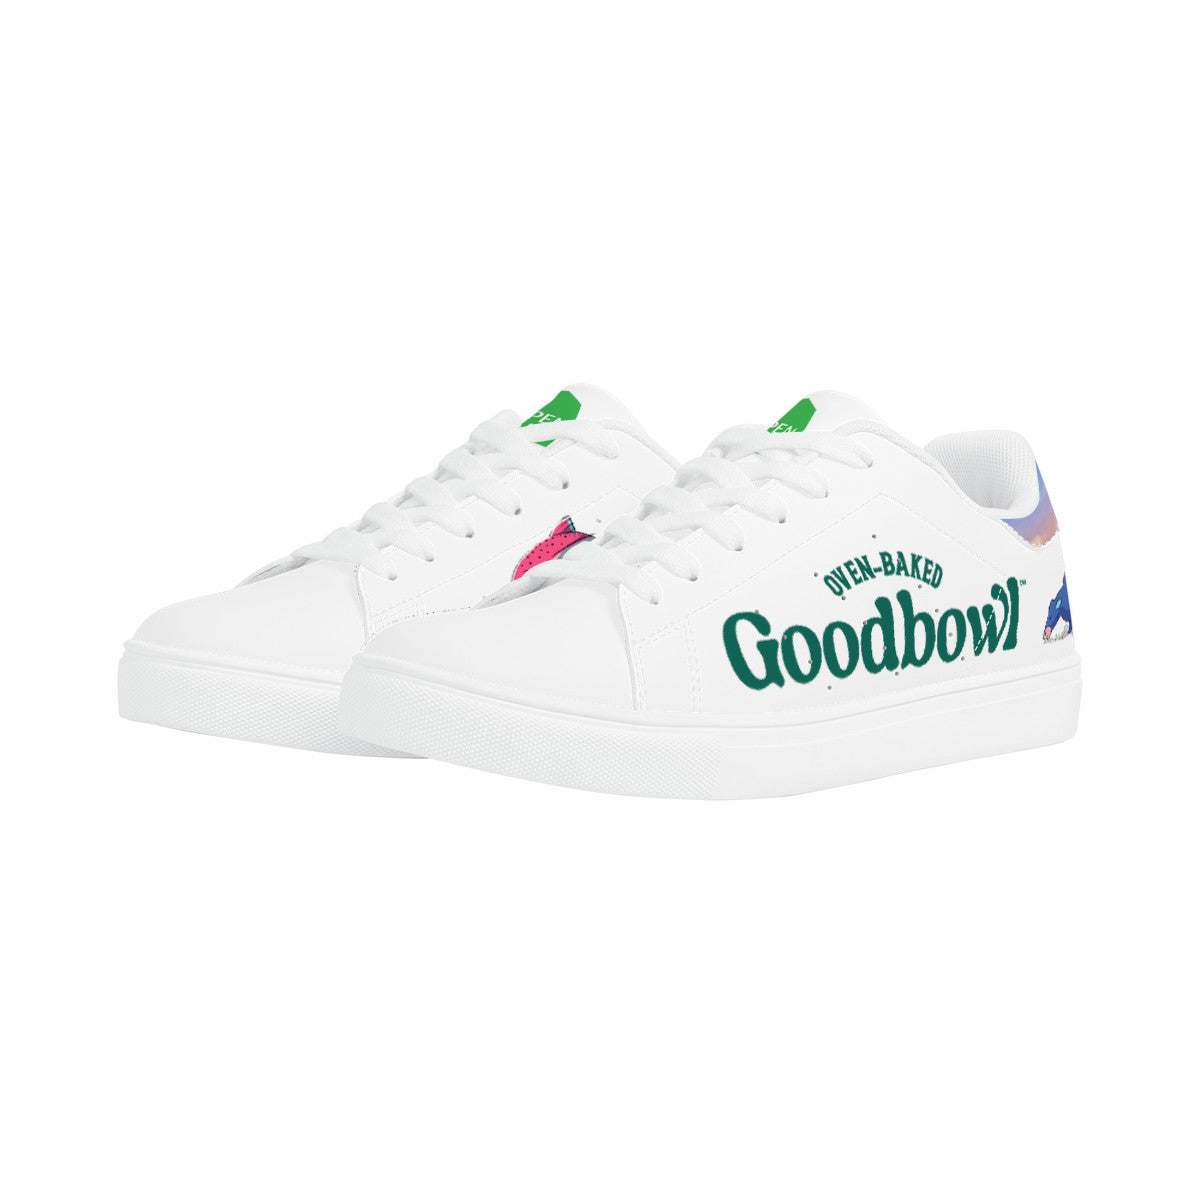 Goodbowl V2 Sneakers | Customized Business Shoes | Shoe Zero